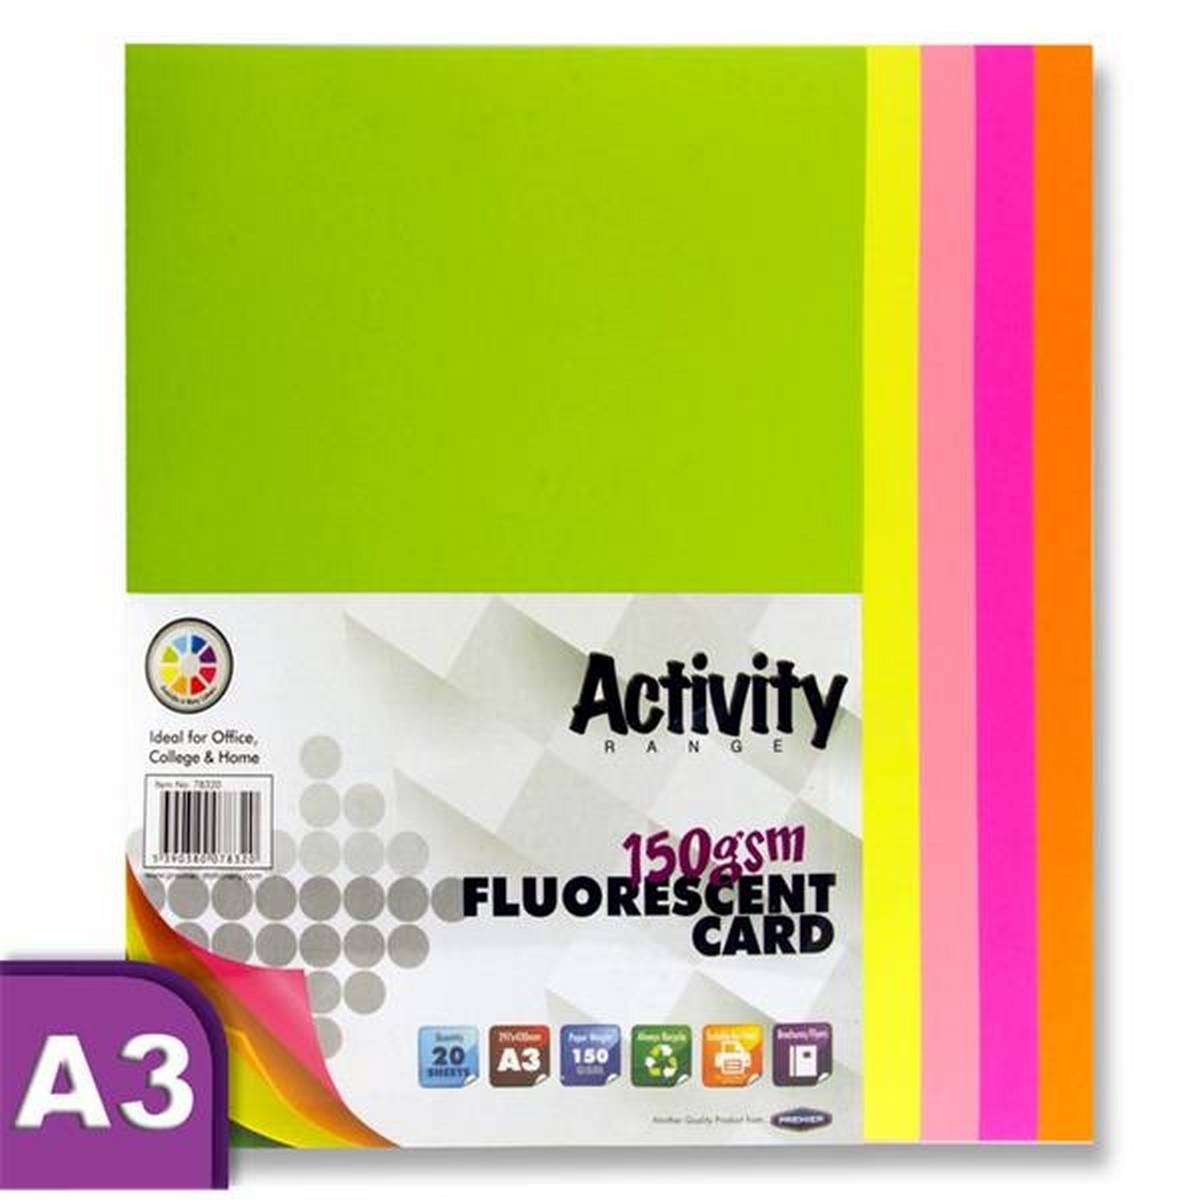 A3 150g Fluorescent Card (Pack of 20)